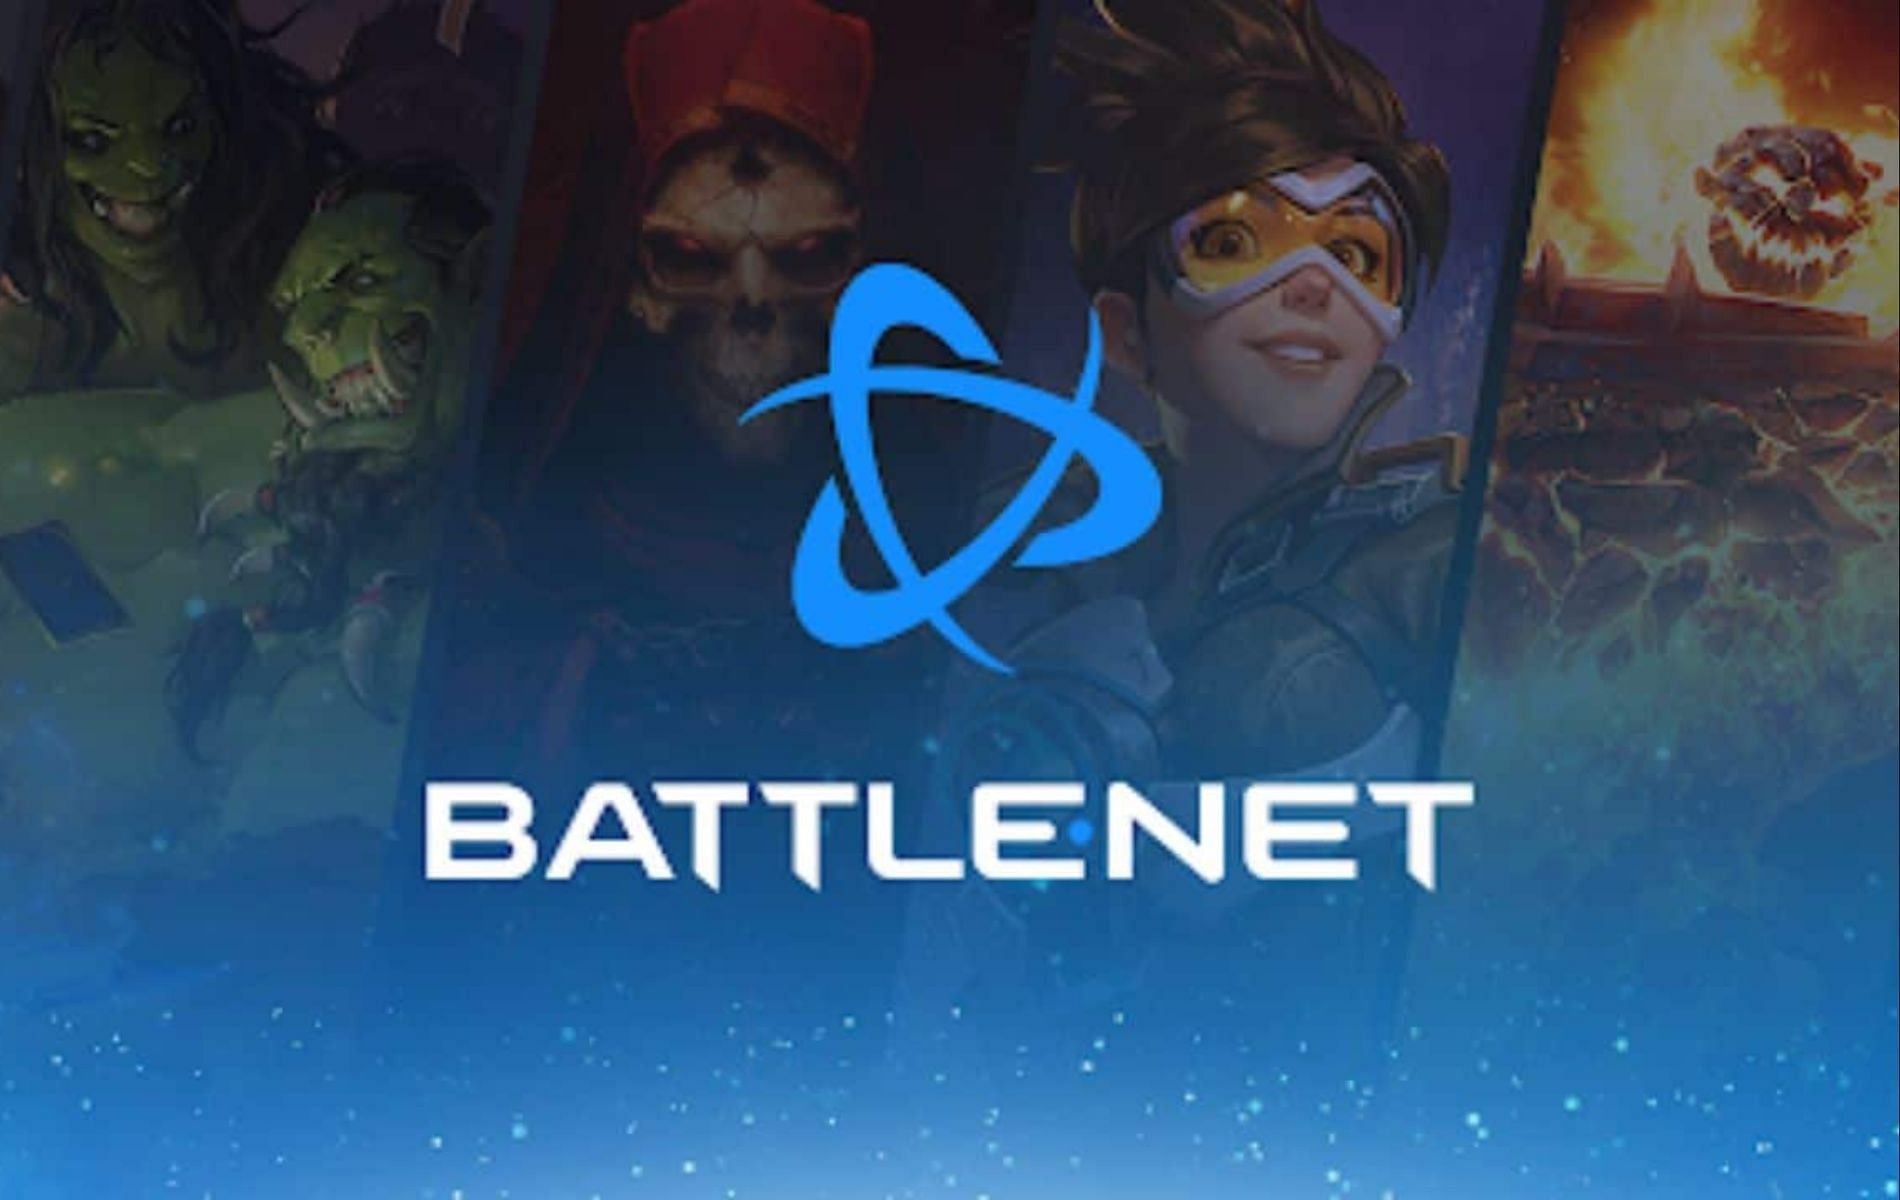 Battle.net Summer Sale 2023 is now on. Save up to 67% on Blizzard